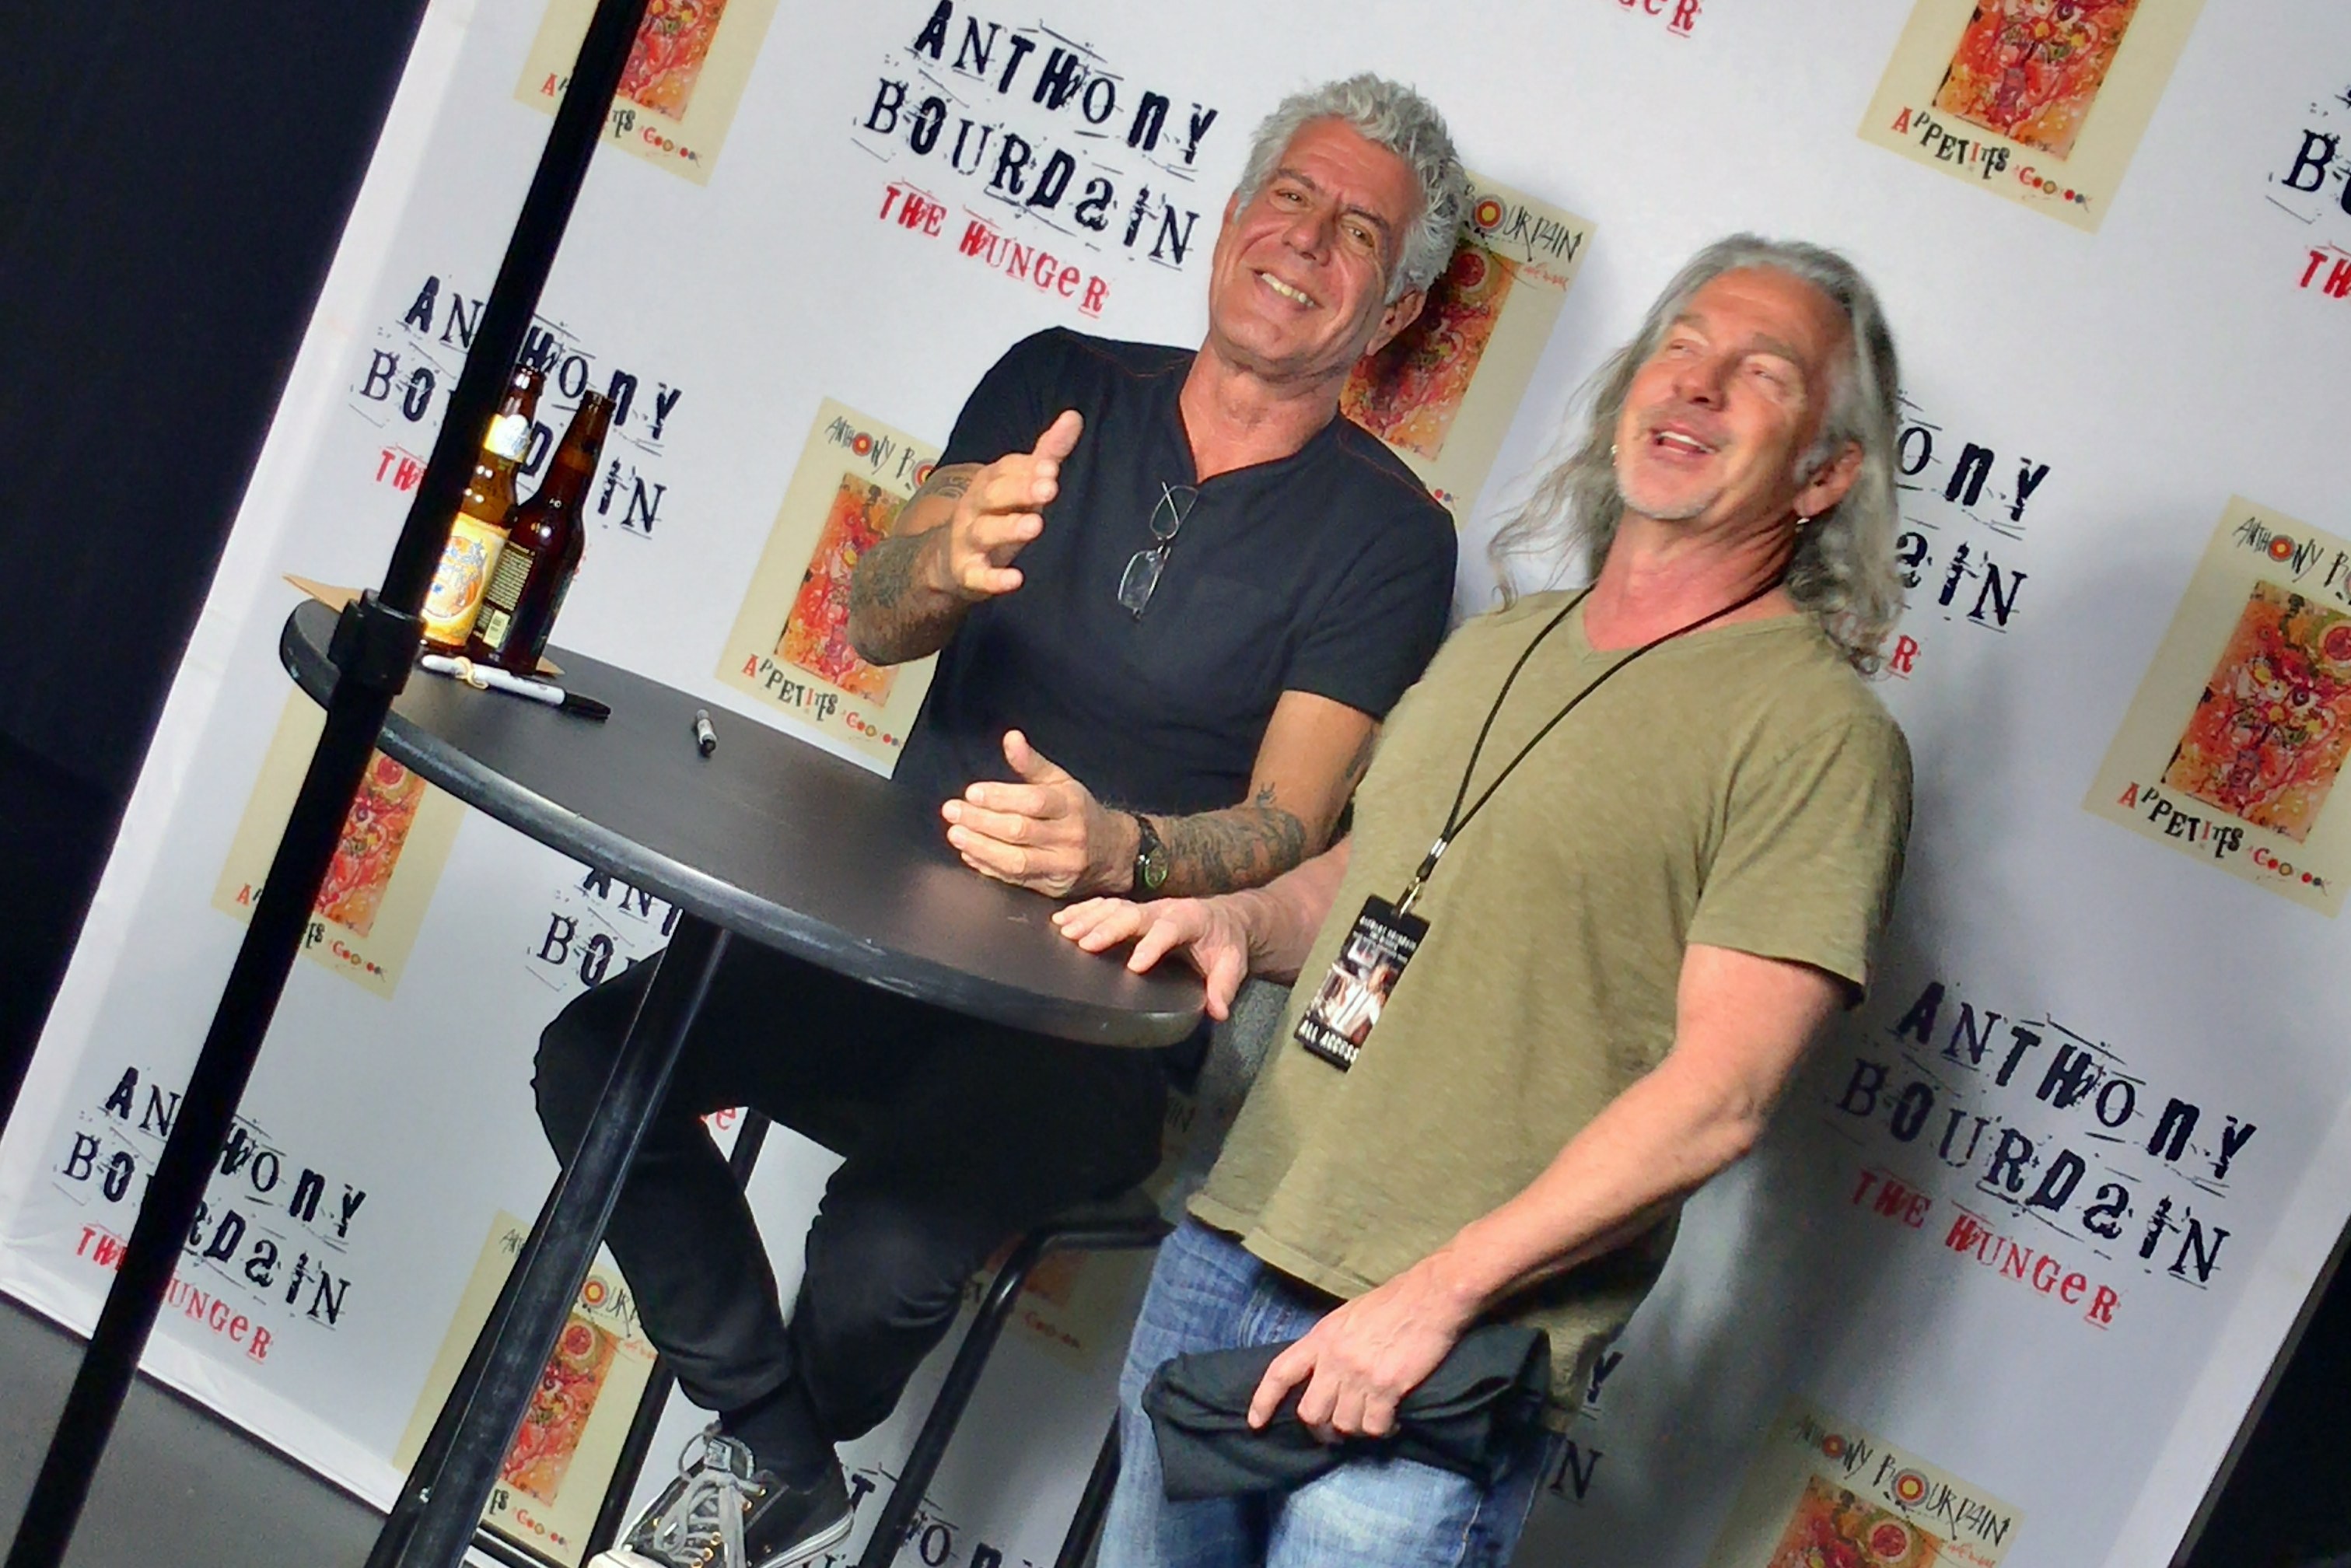 Anthony Bourdain Once Hated Denver, But Saw Potential by 2009